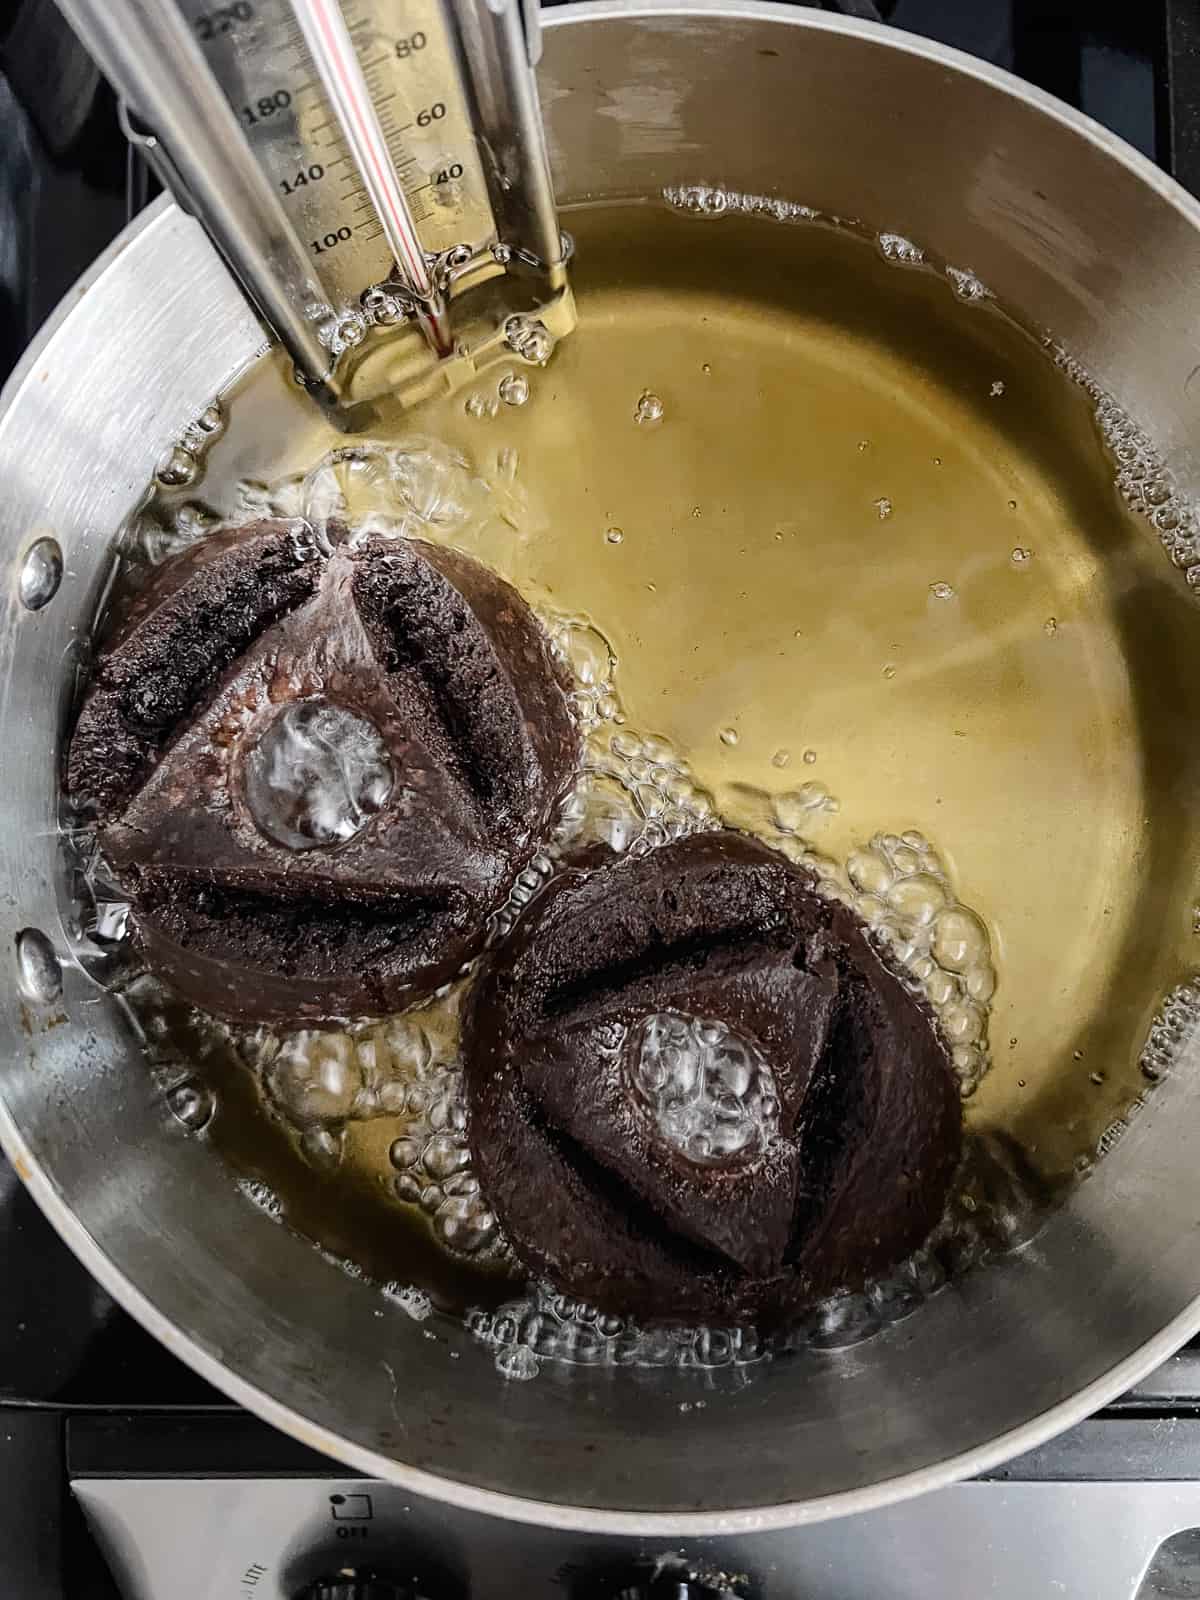 Two chocolate donuts are frying in a pot of oil.